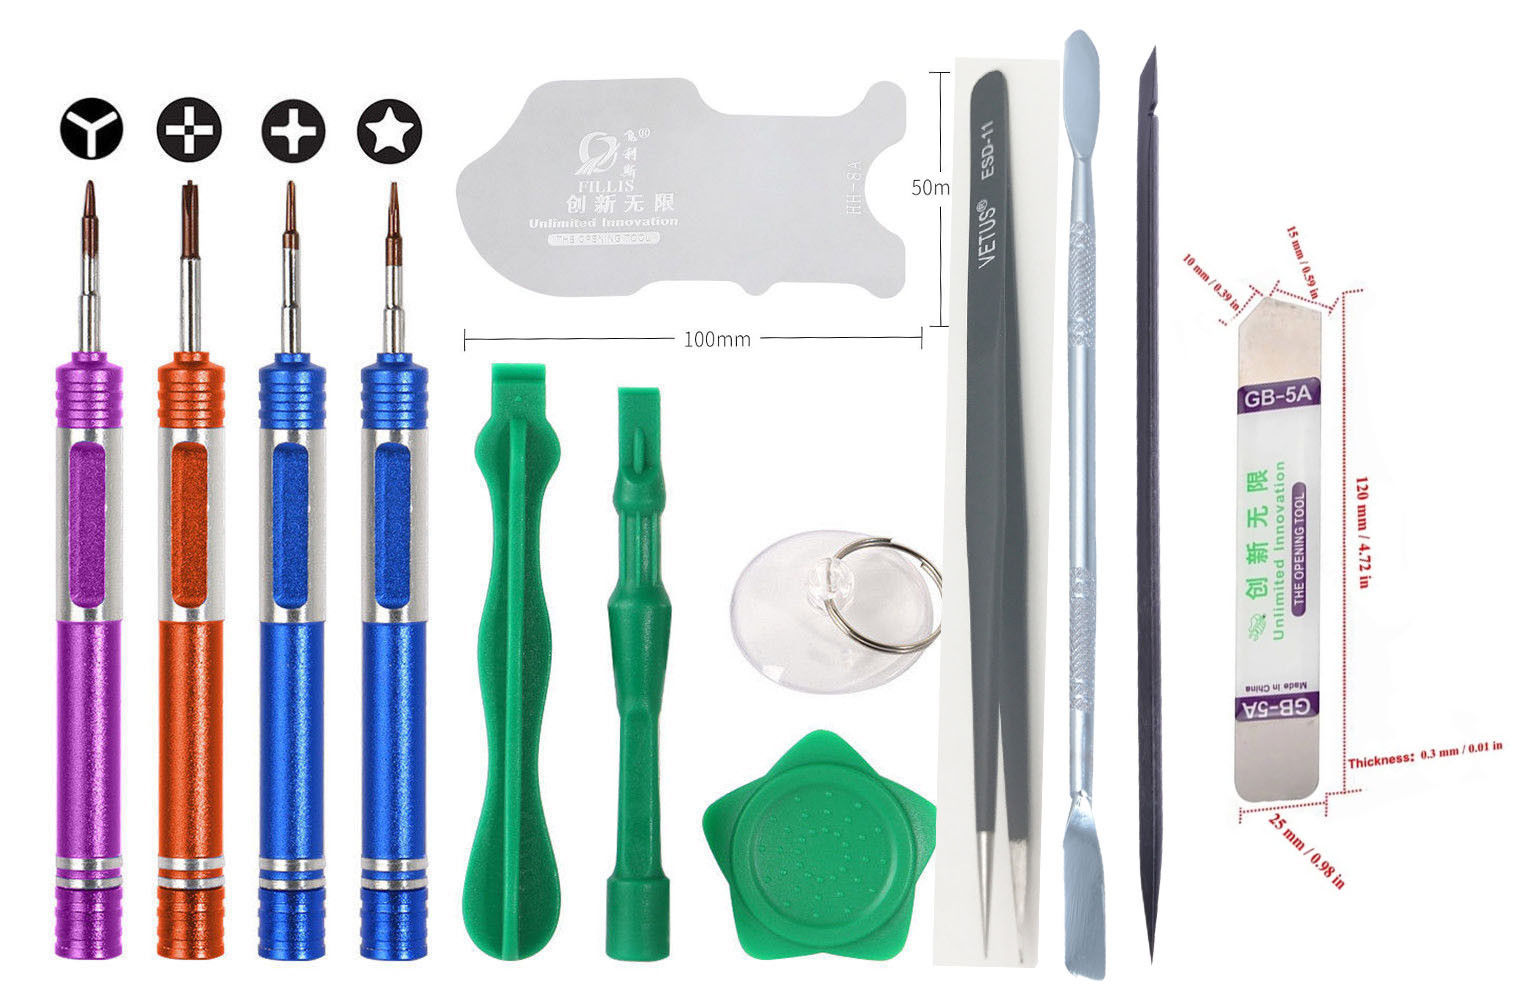 Deluxe Cell Phone Repair Tool Kits Compatible with iPhone 7 9 in 1 Repair Tool Set Repair Kits